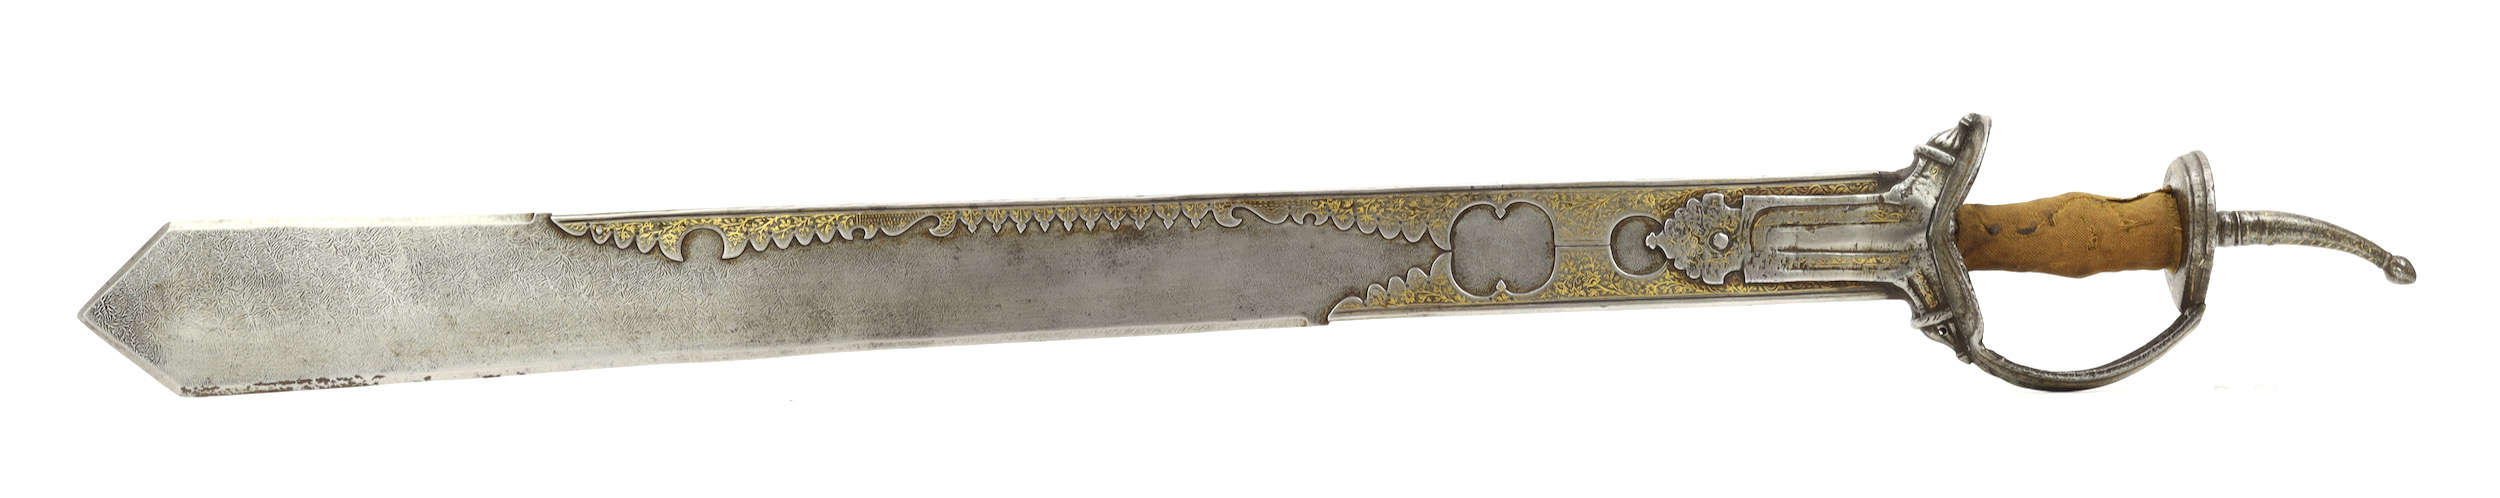 Indian Khanda sword with etched blade